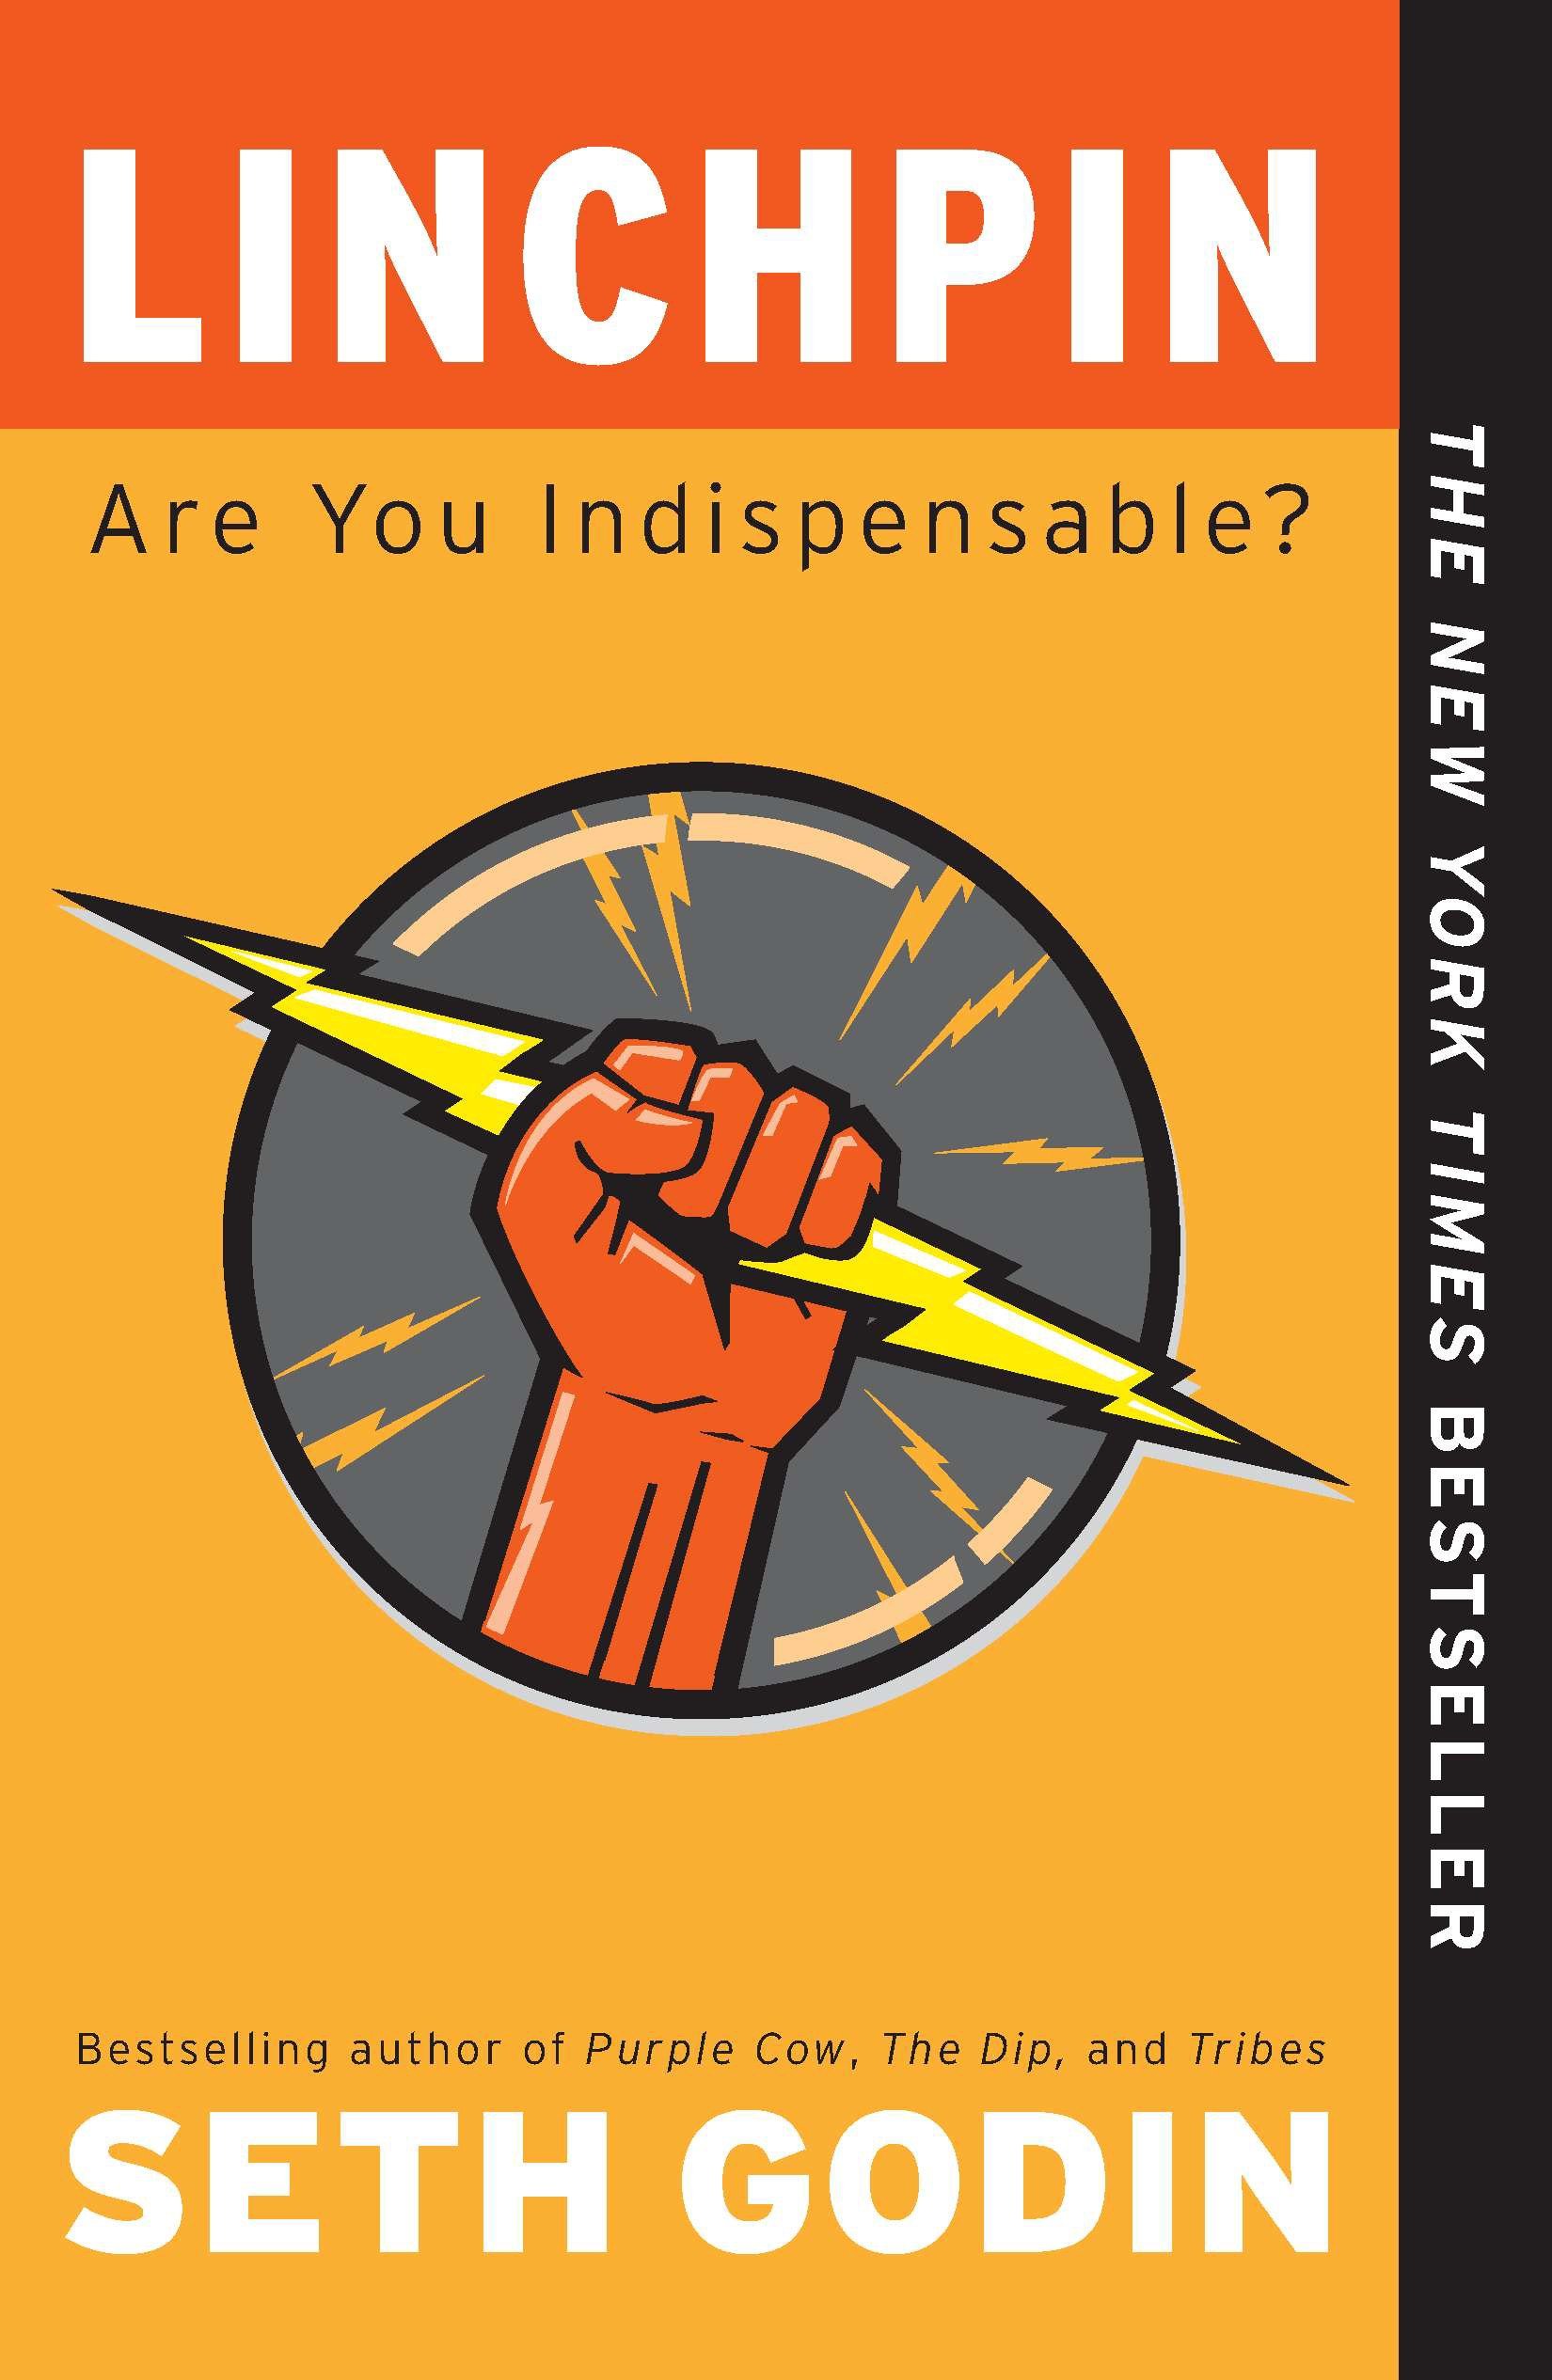 Linchpin are you indispensible? cover image